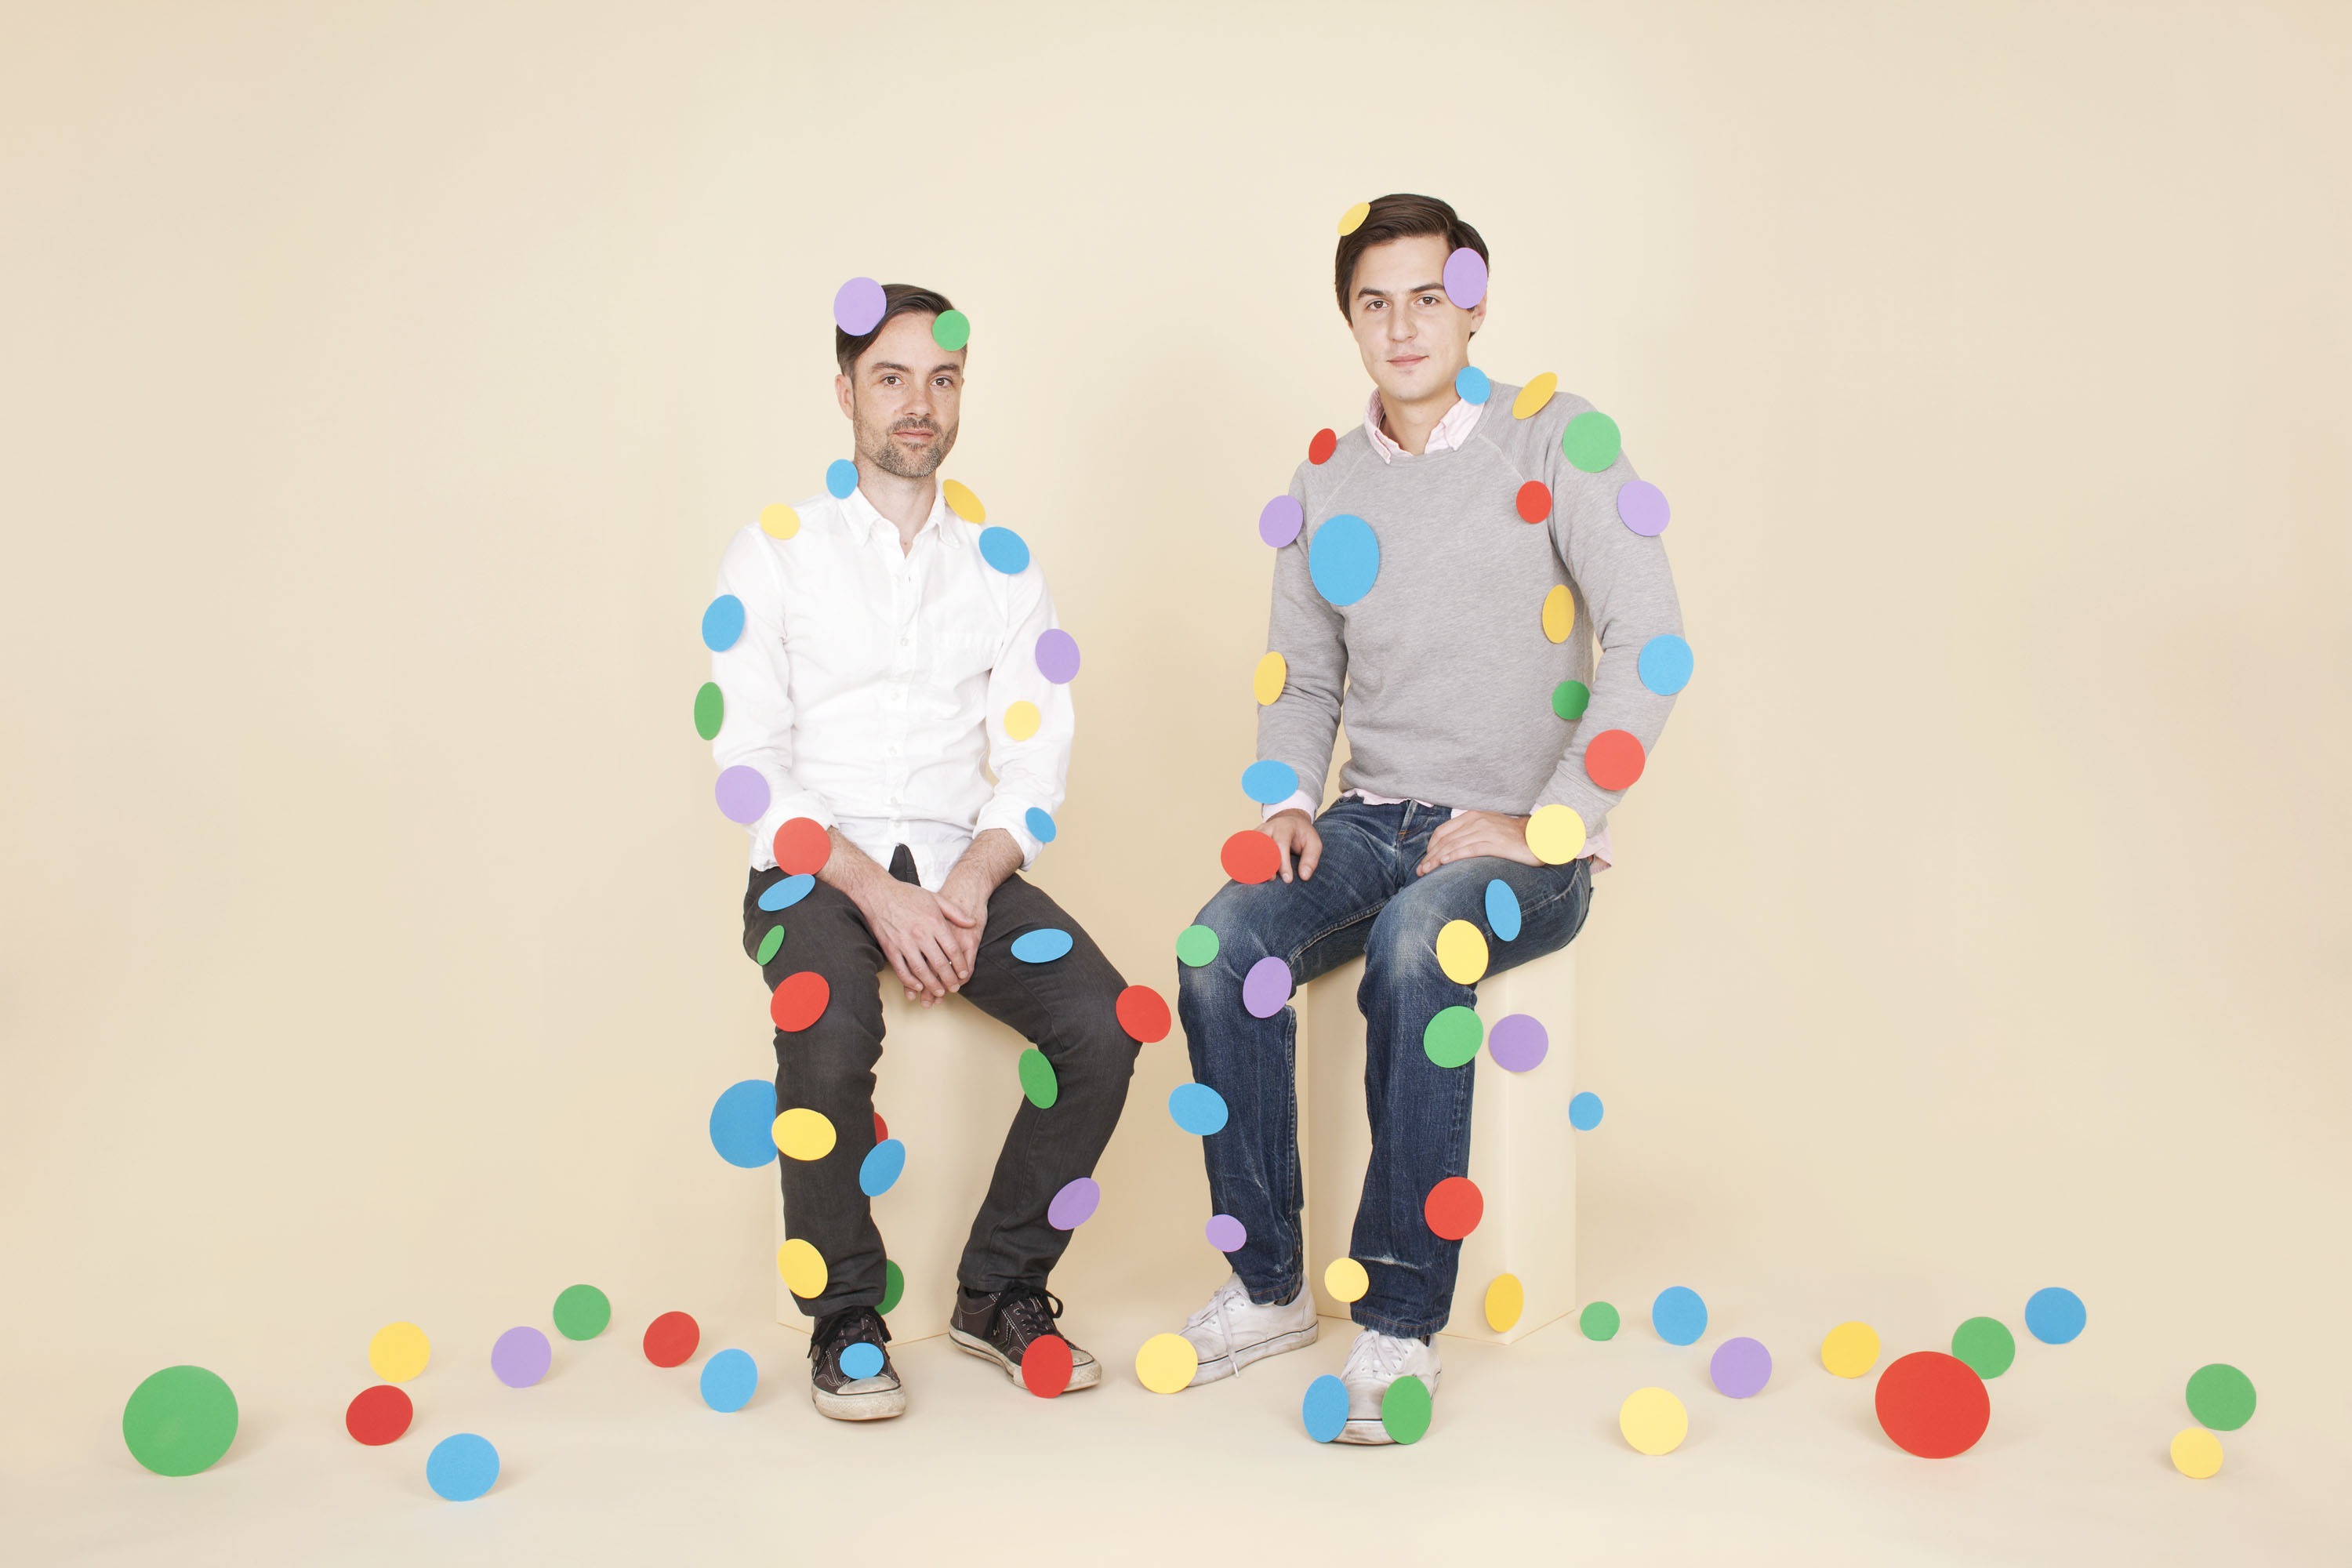 Paul Murphy, left, and Patrick Moberg are the CEO and CCO of Playdots, which makes the hit mobile games Dots and Two Dots. (Ina Jang for TIME)